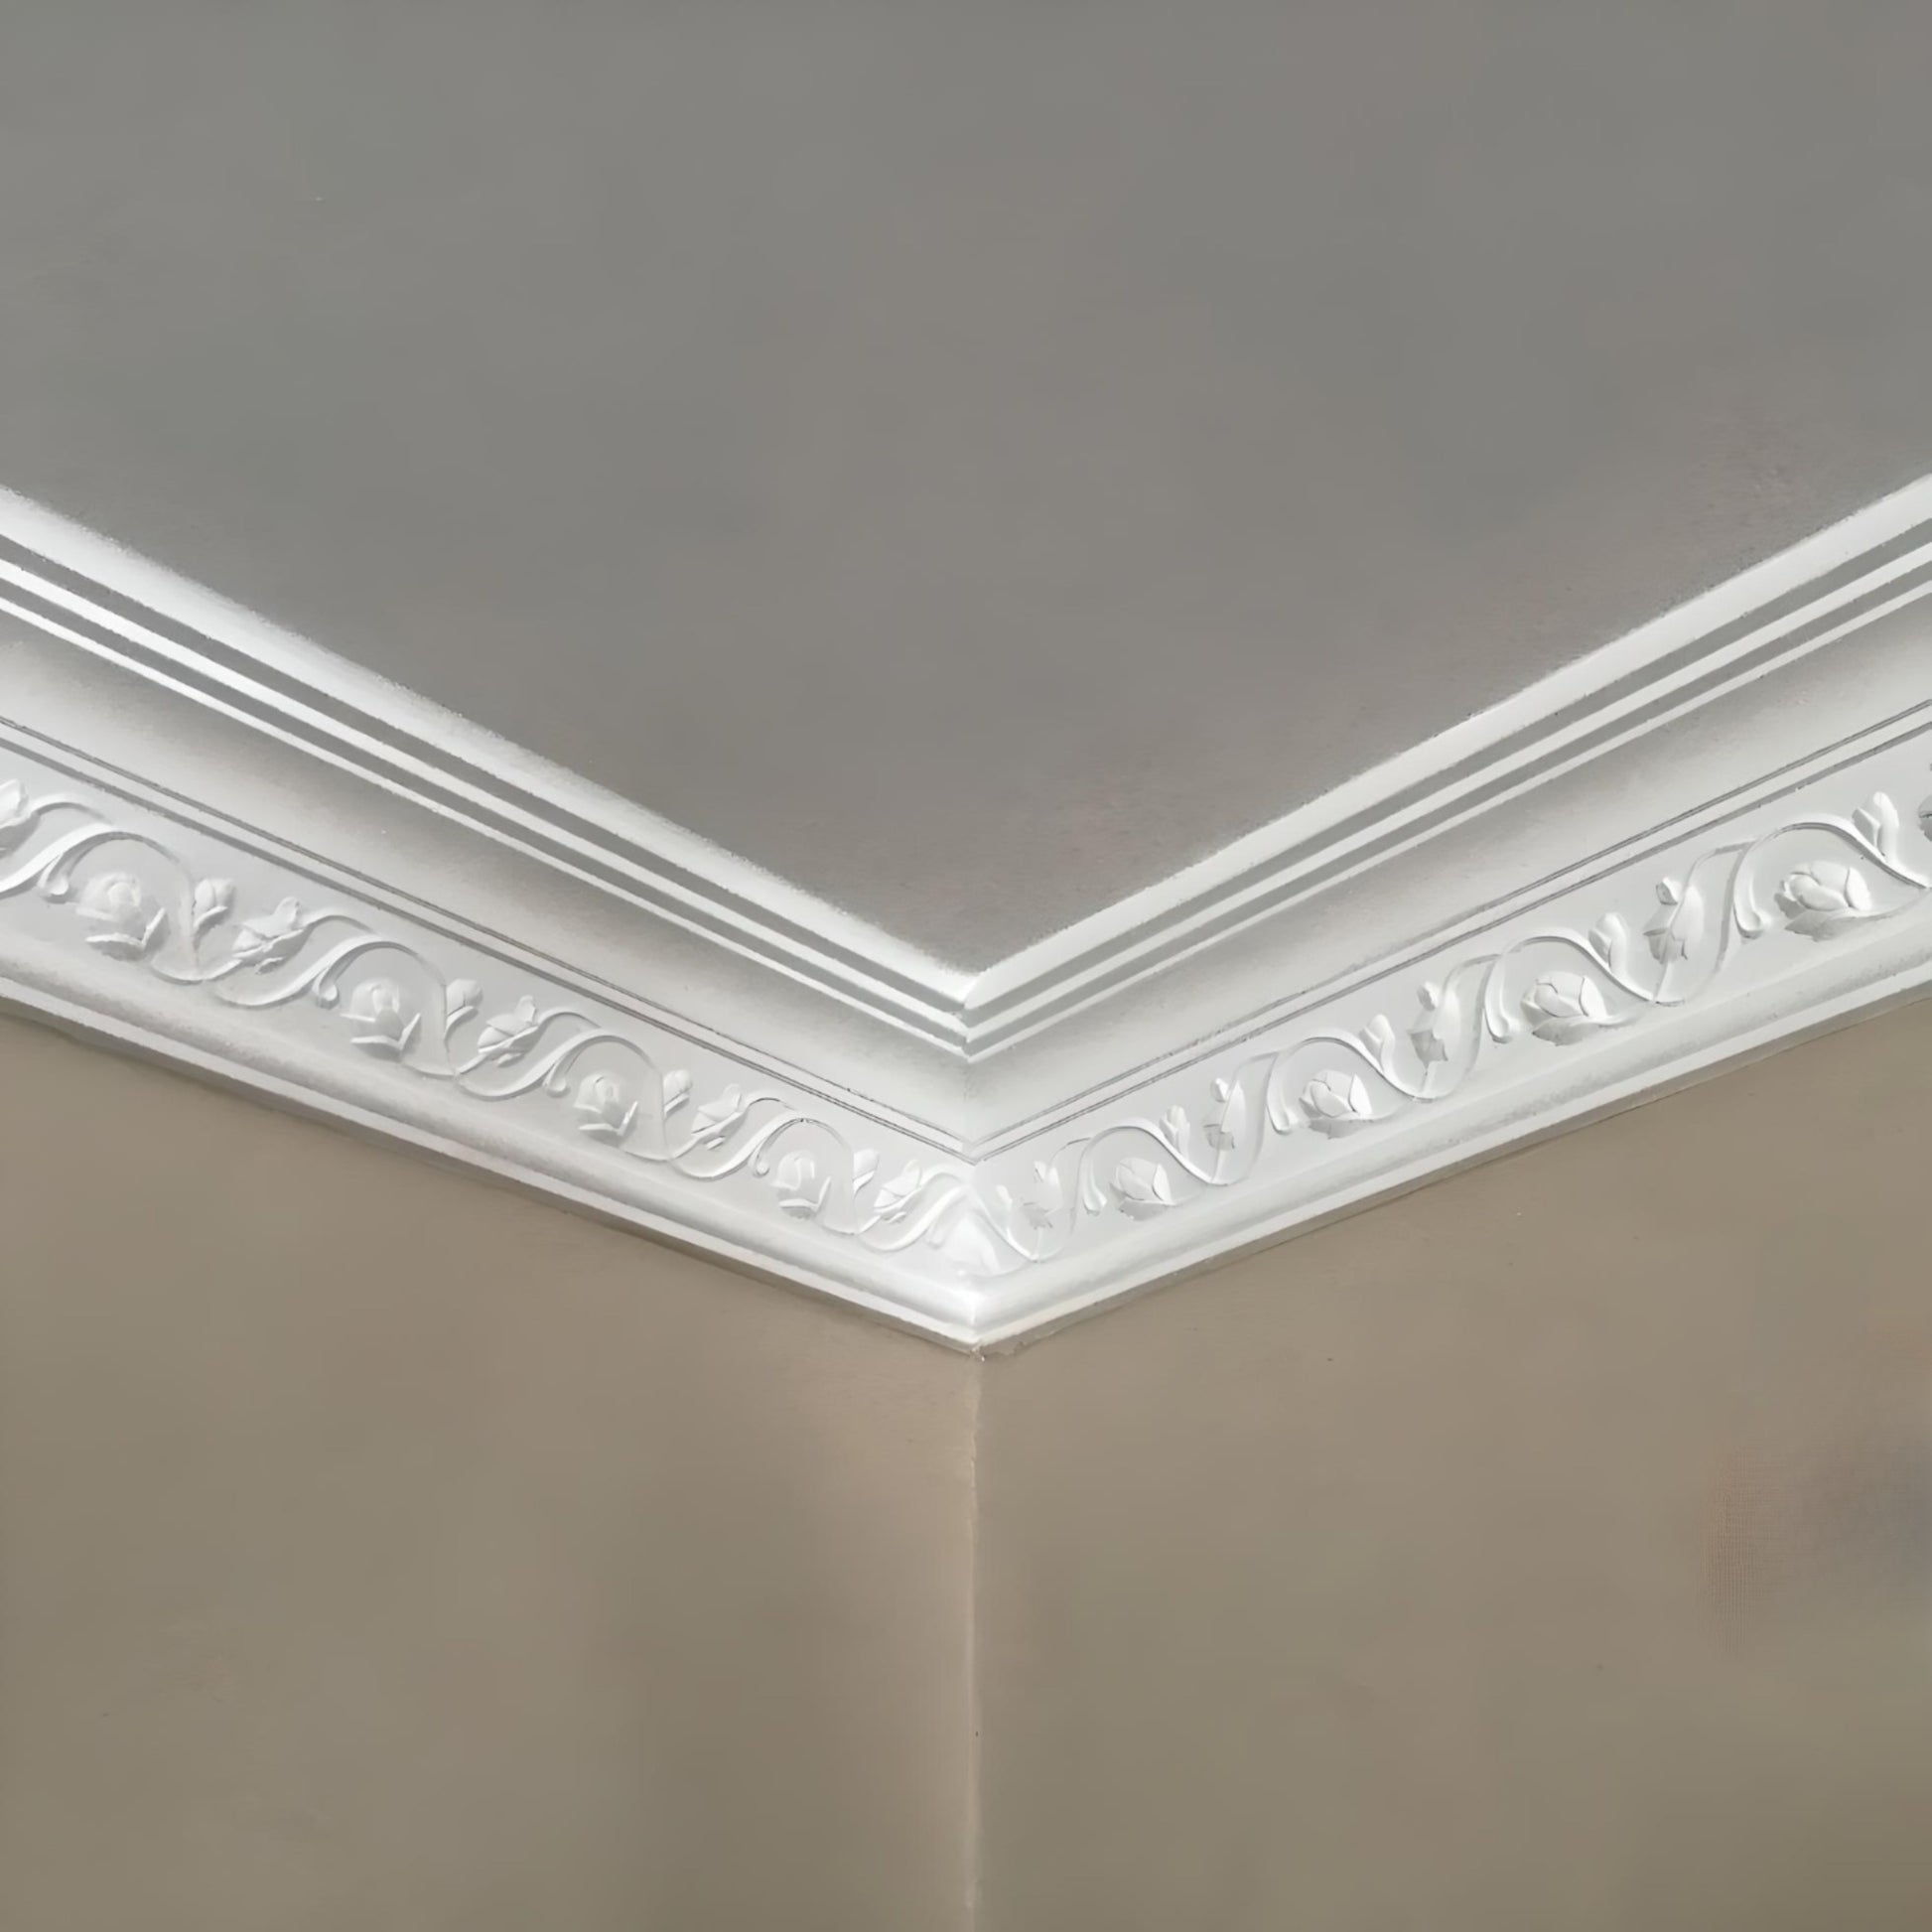 floral victorian plaster coving shown in cream room